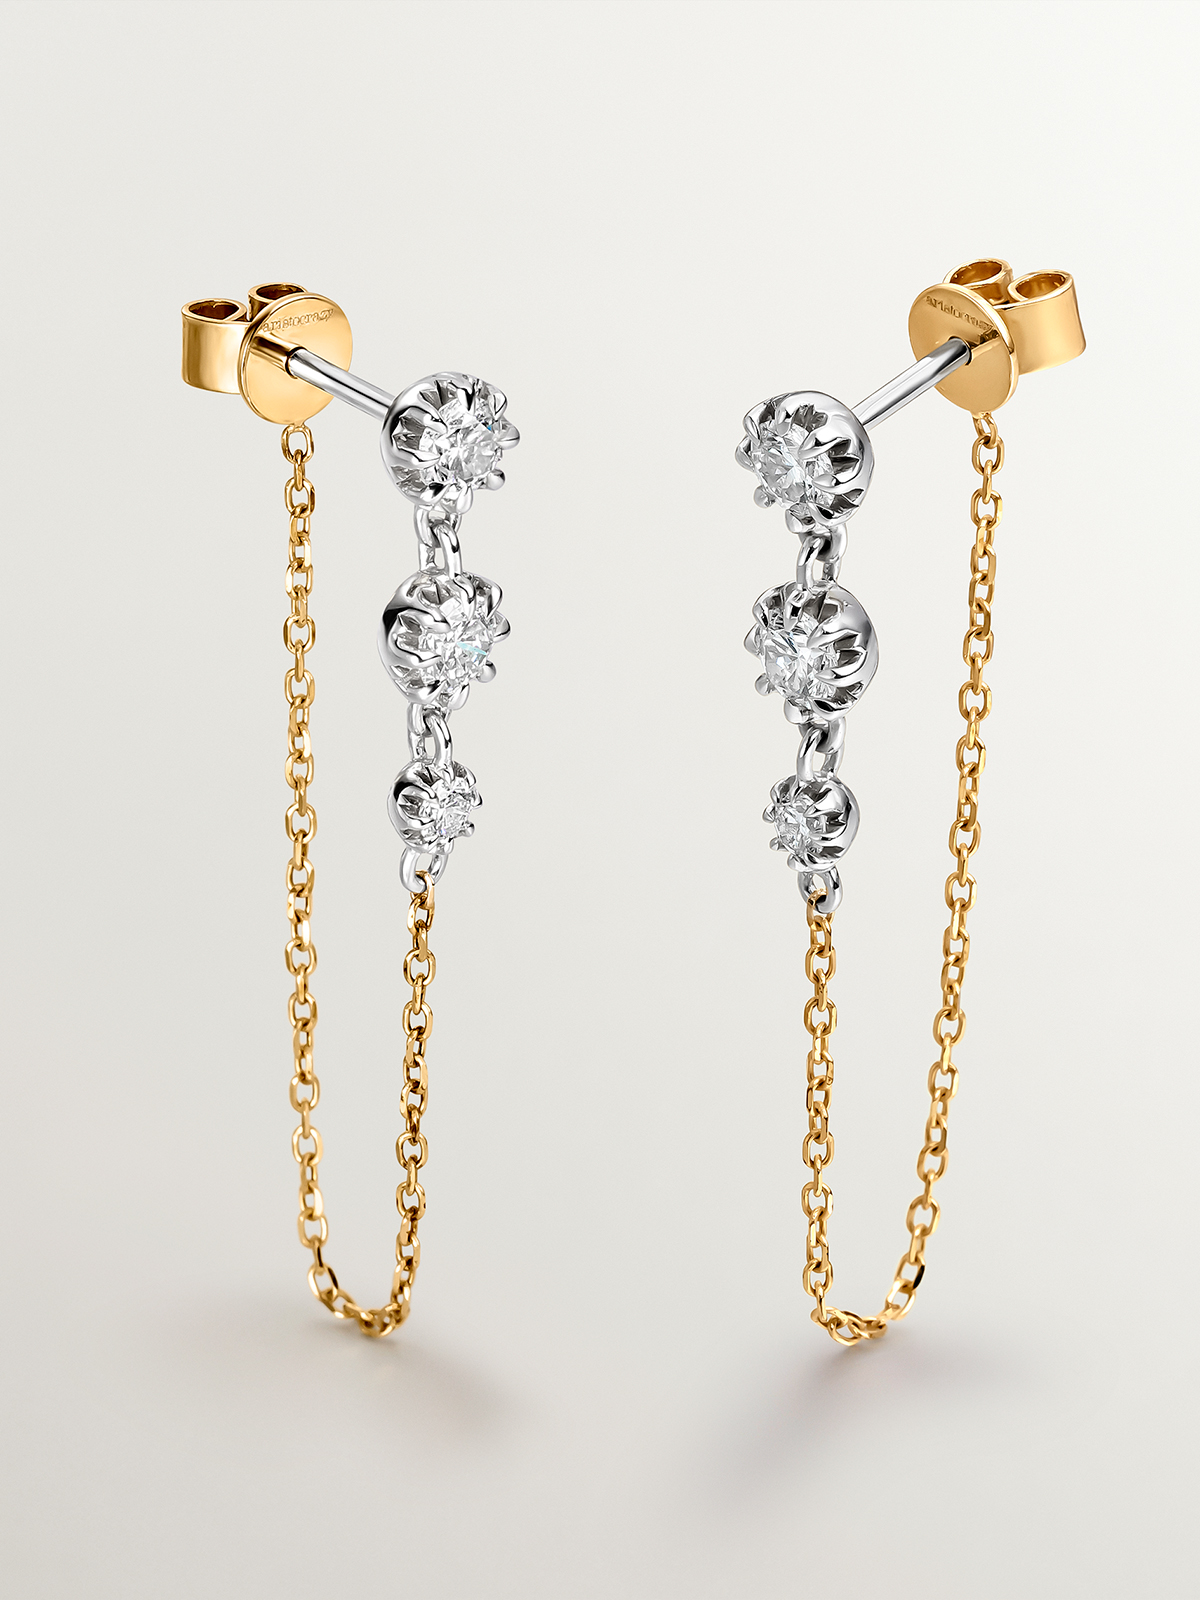 18K white and yellow gold earrings with brilliant cut diamonds